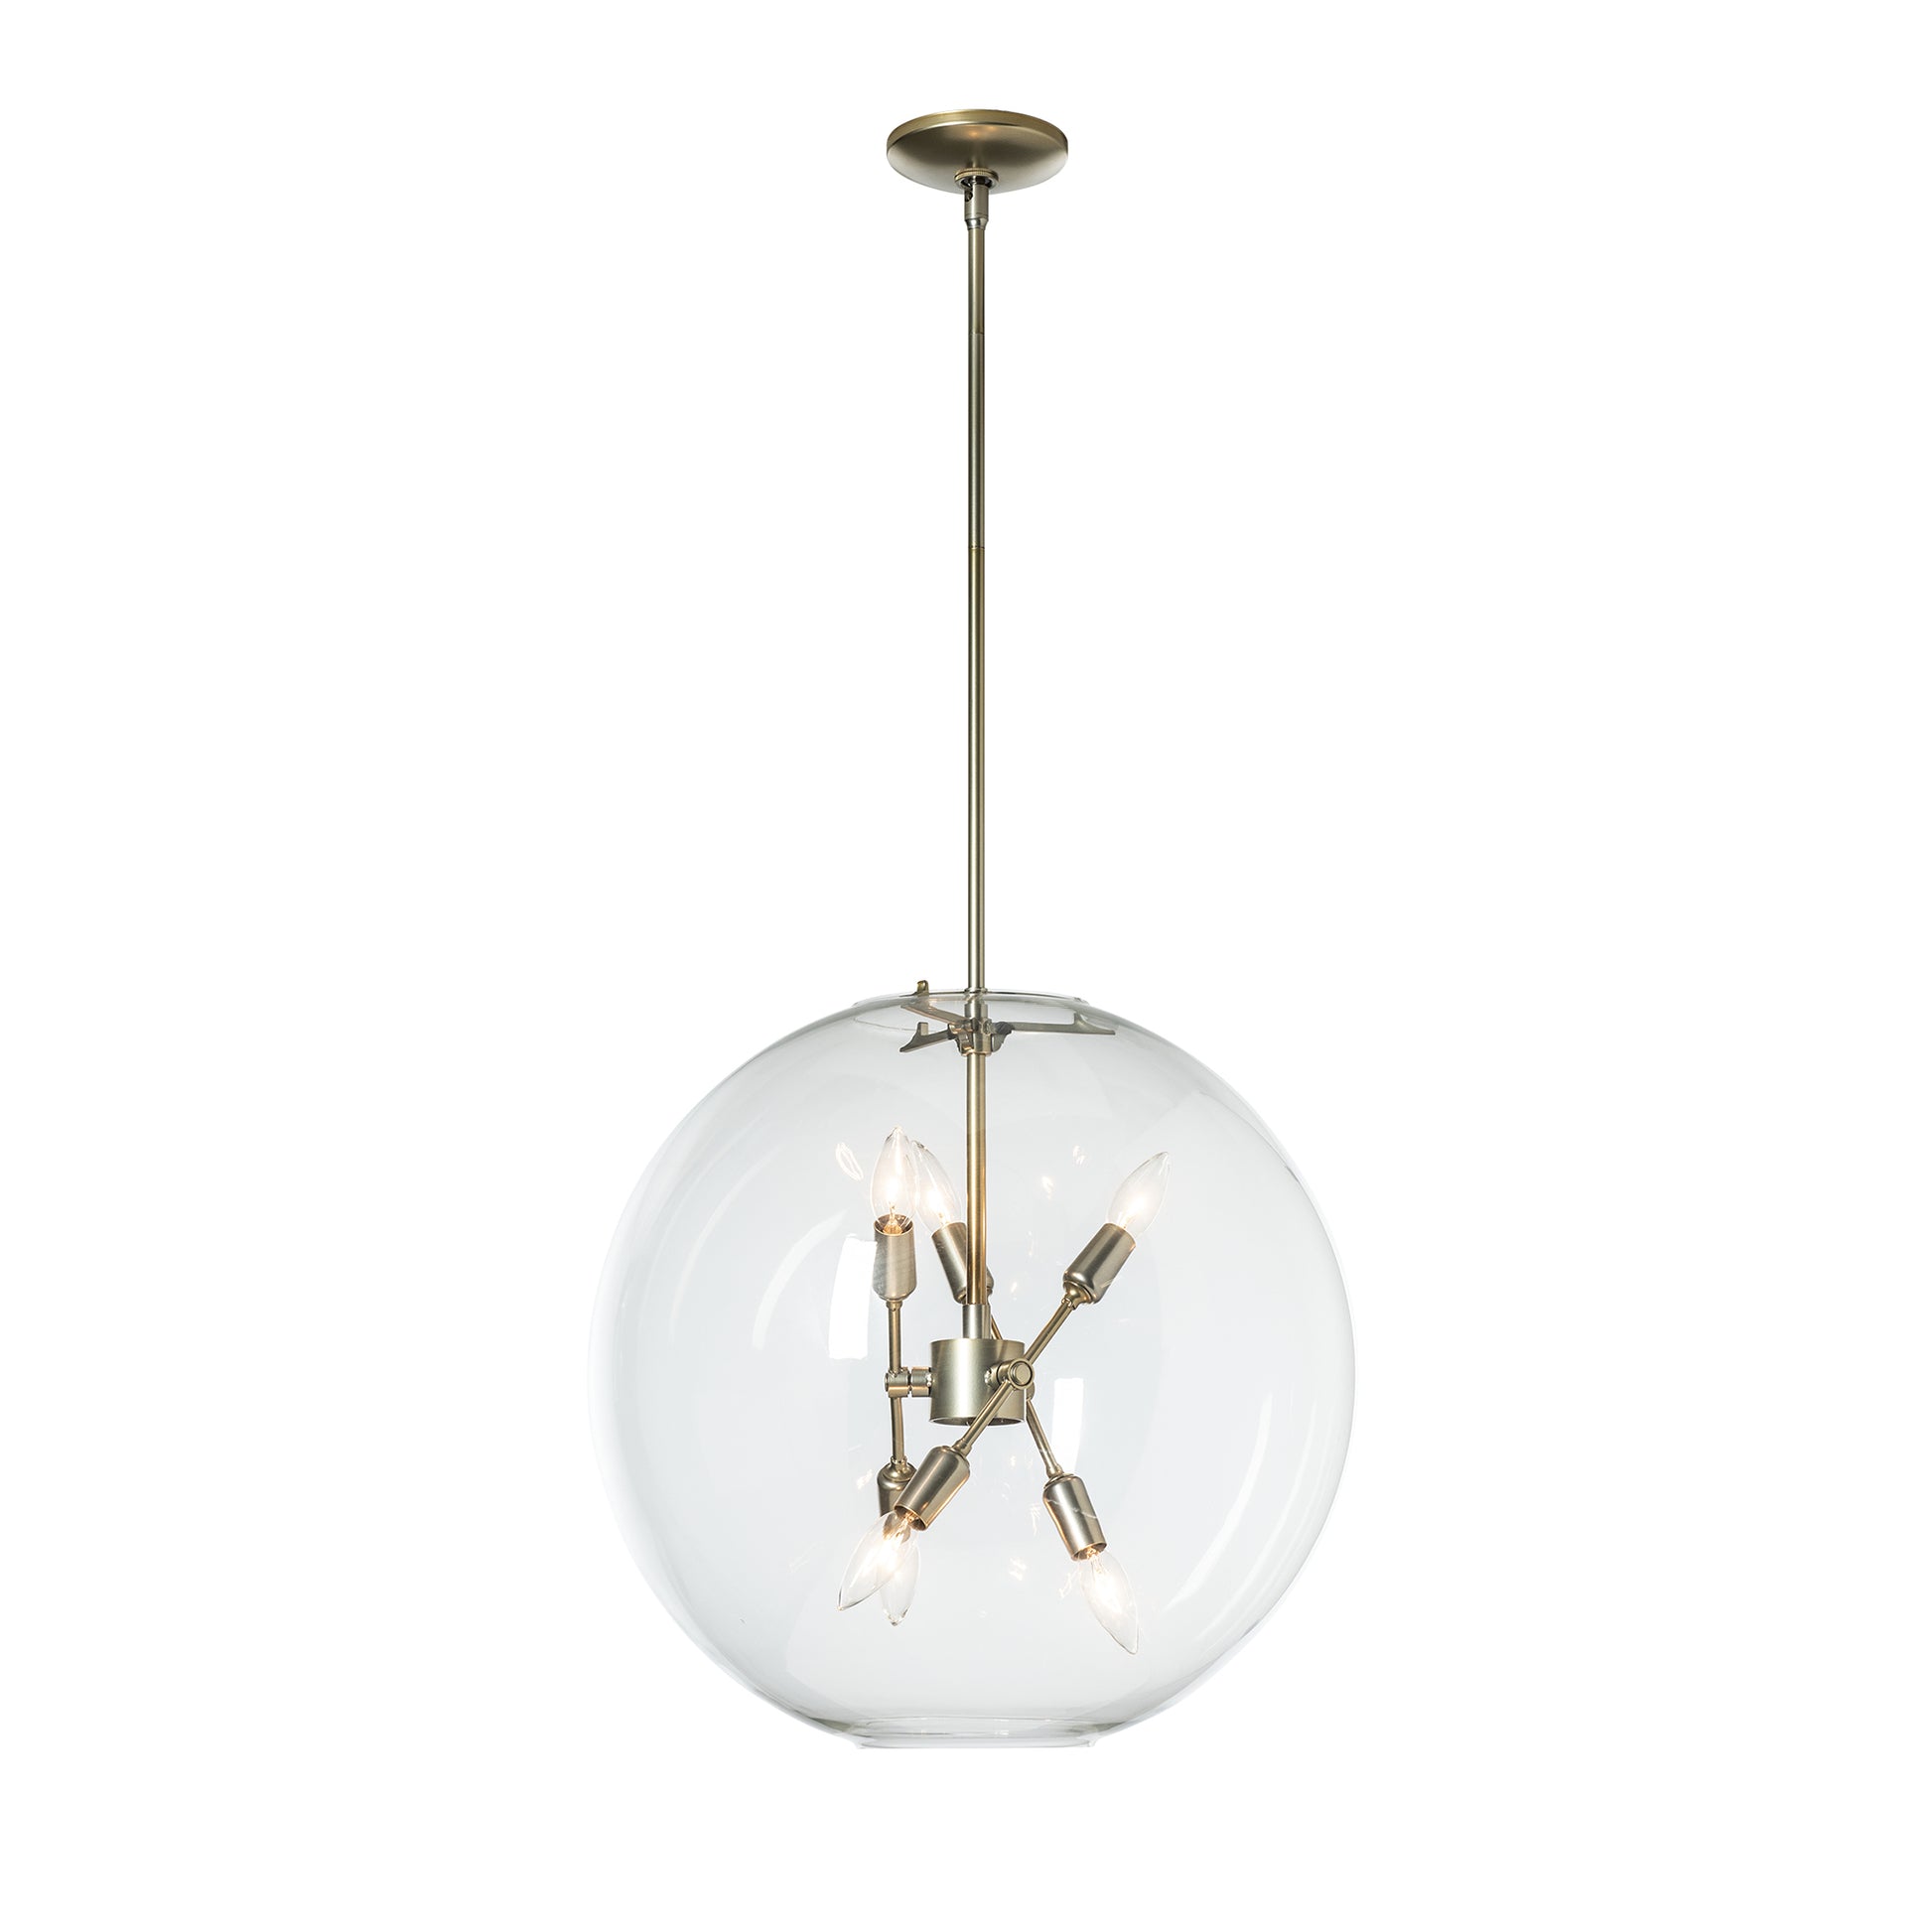 A Hubbardton Forge chandelier featuring a Hubbardton Forge Sfera 6-Light Pendant with a clear glass globe hanging from the ceiling.